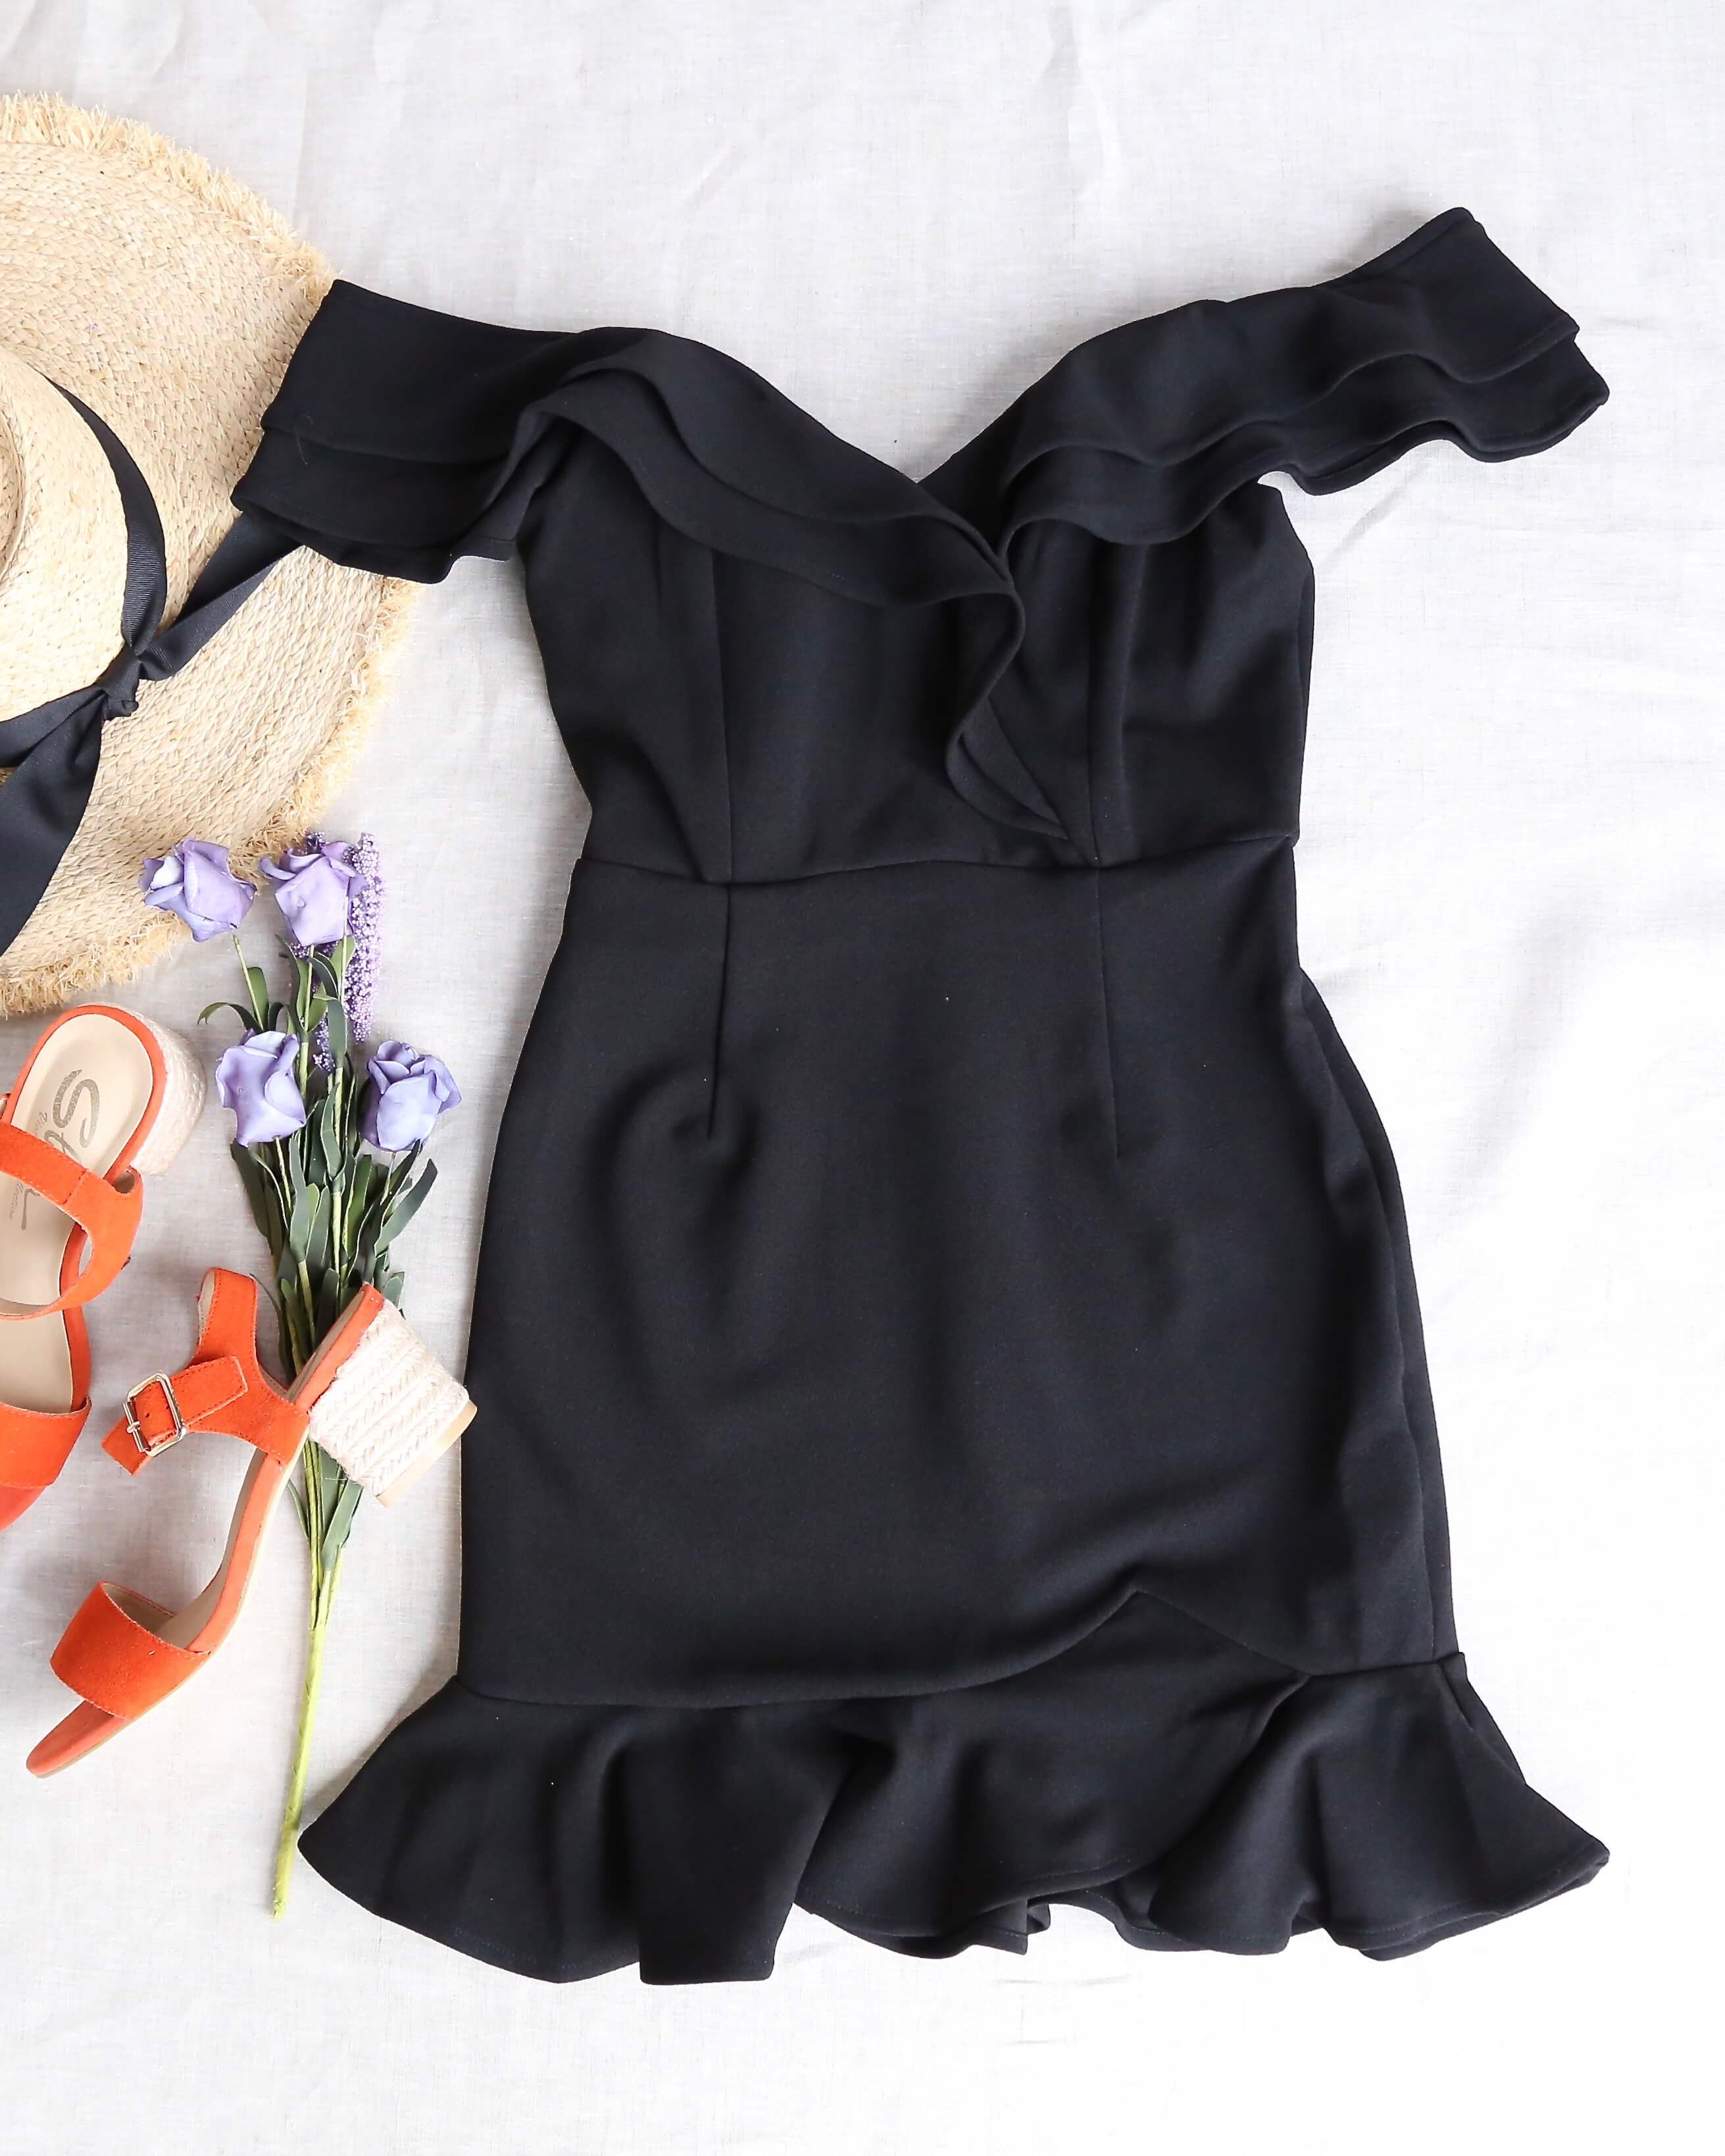 Making Wishes Off The Shoulder Ruffled Mini Bodycon Dress in Black ...